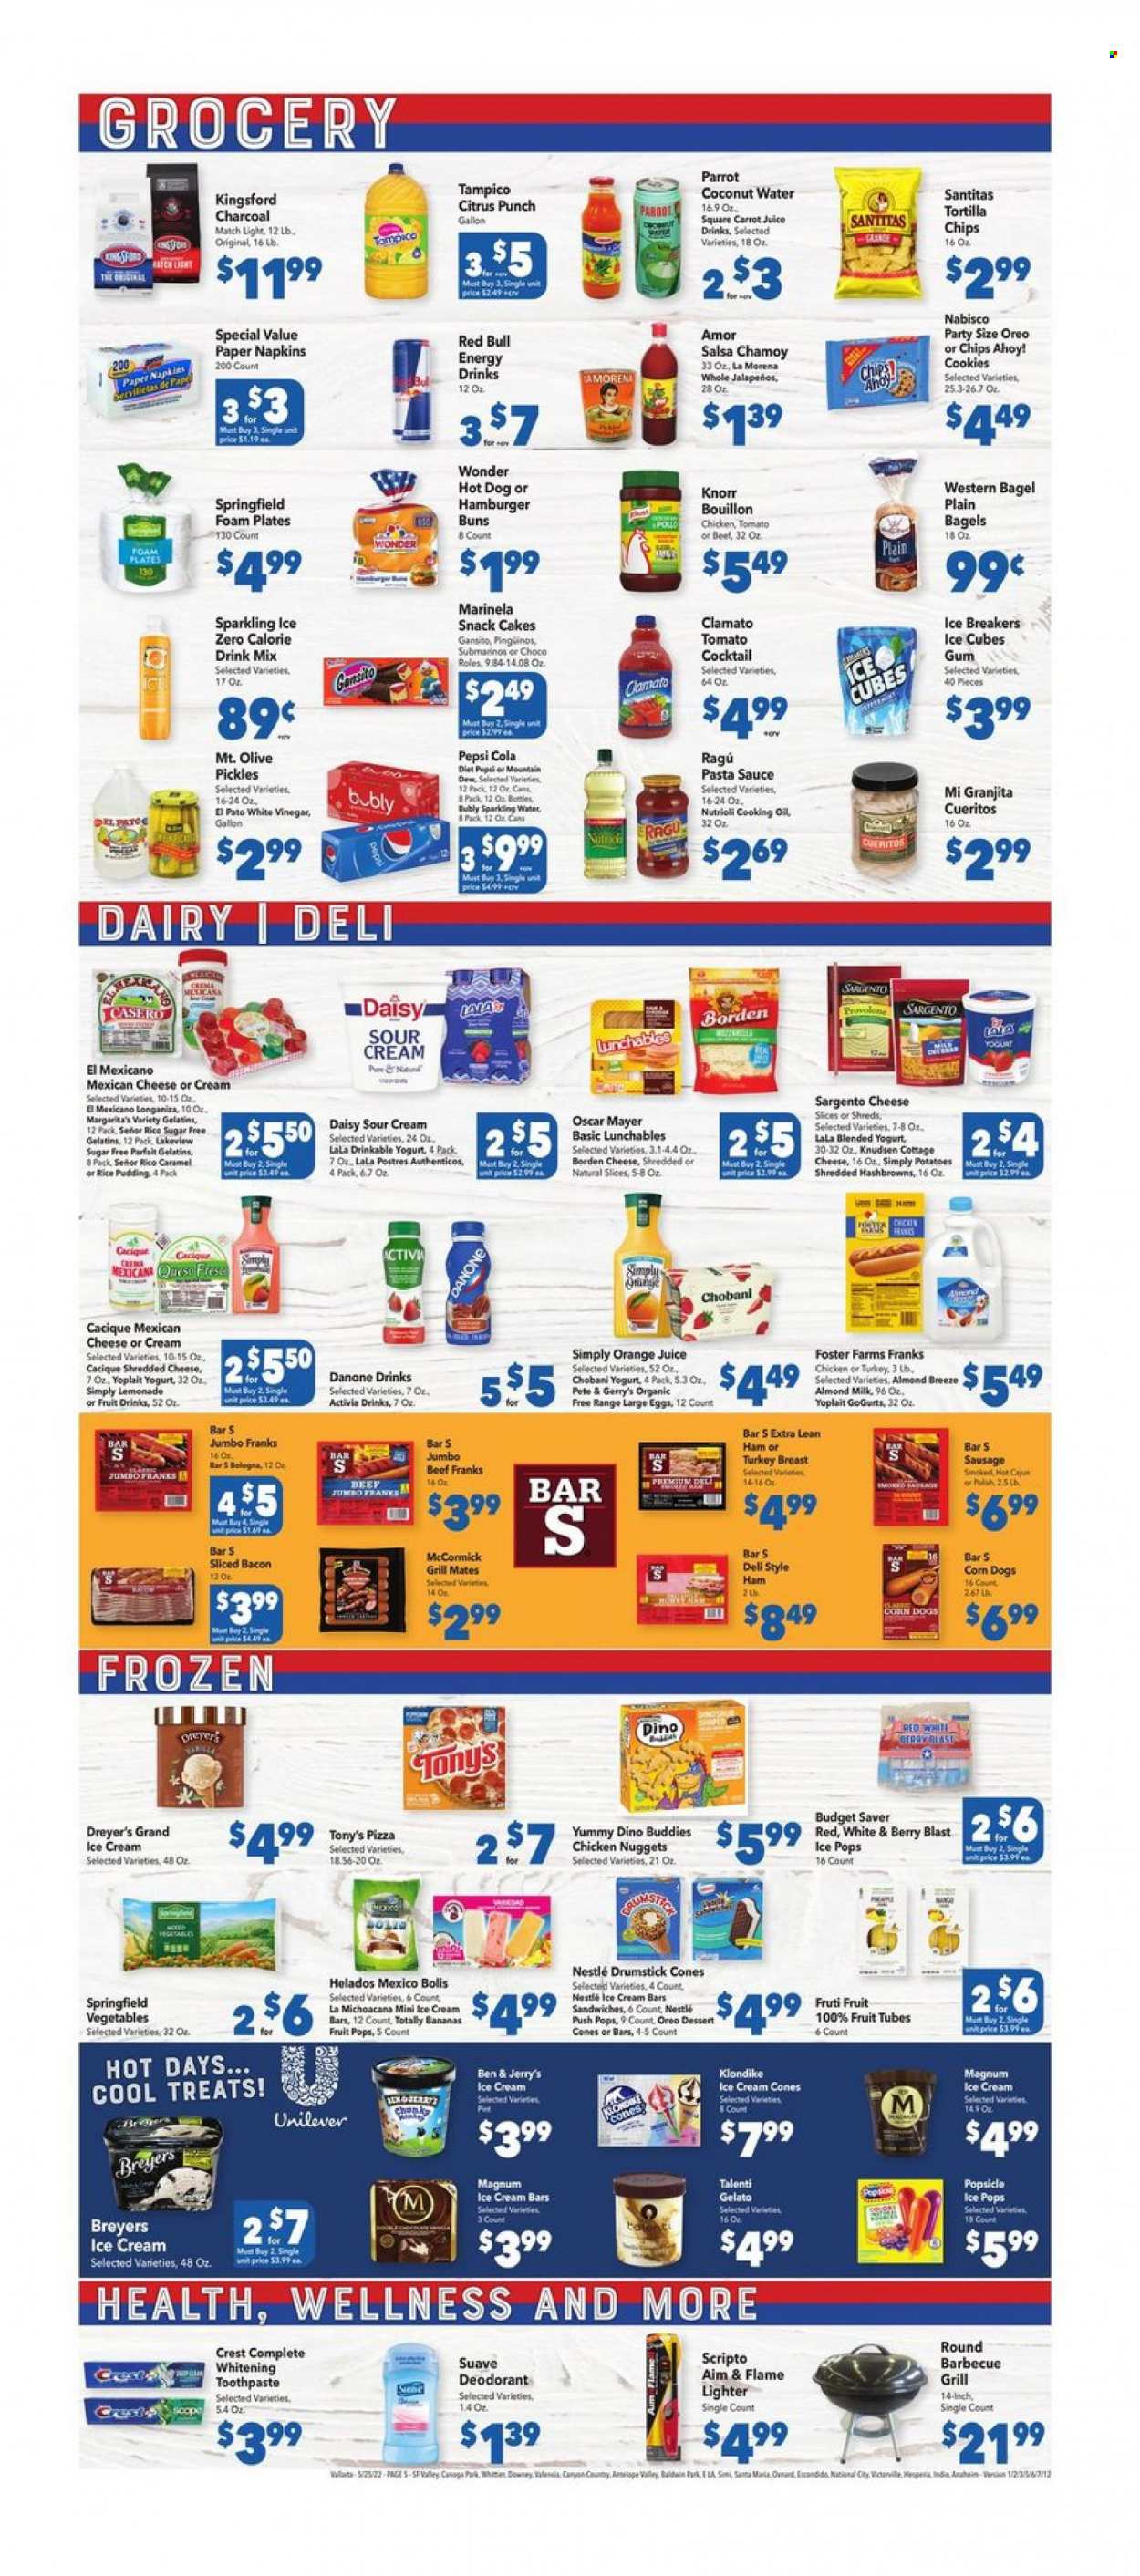 thumbnail - Vallarta Flyer - 05/25/2022 - 05/31/2022 - Sales products - bagels, cake, buns, burger buns, potatoes, turkey breast, hot dog, pizza, pasta sauce, sandwich, nuggets, Knorr, sauce, chicken nuggets, Yummy Dino Buddies, Lunchables, ragú pasta, bacon, ham, bologna sausage, Oscar Mayer, sausage, cottage cheese, shredded cheese, sliced cheese, Provolone, Sargento, yoghurt, Danone, Activia, Yoplait, Chobani, rice pudding, almond milk, Almond Breeze, large eggs, sour cream, Magnum, ice cream, ice cream bars, Ben & Jerry's, Talenti Gelato, gelato, hash browns, cookies, Nestlé, snack, ice cubes gum, Chips Ahoy!, tortilla chips, bouillon, pickles, salsa, ragu, cooking oil, lemonade, Pepsi, orange juice, juice, energy drink, Diet Pepsi, Clamato, Red Bull, fruit punch, sparkling water, napkins, Suave, toothpaste, Crest, anti-perspirant, deodorant, gelatin. Page 5.